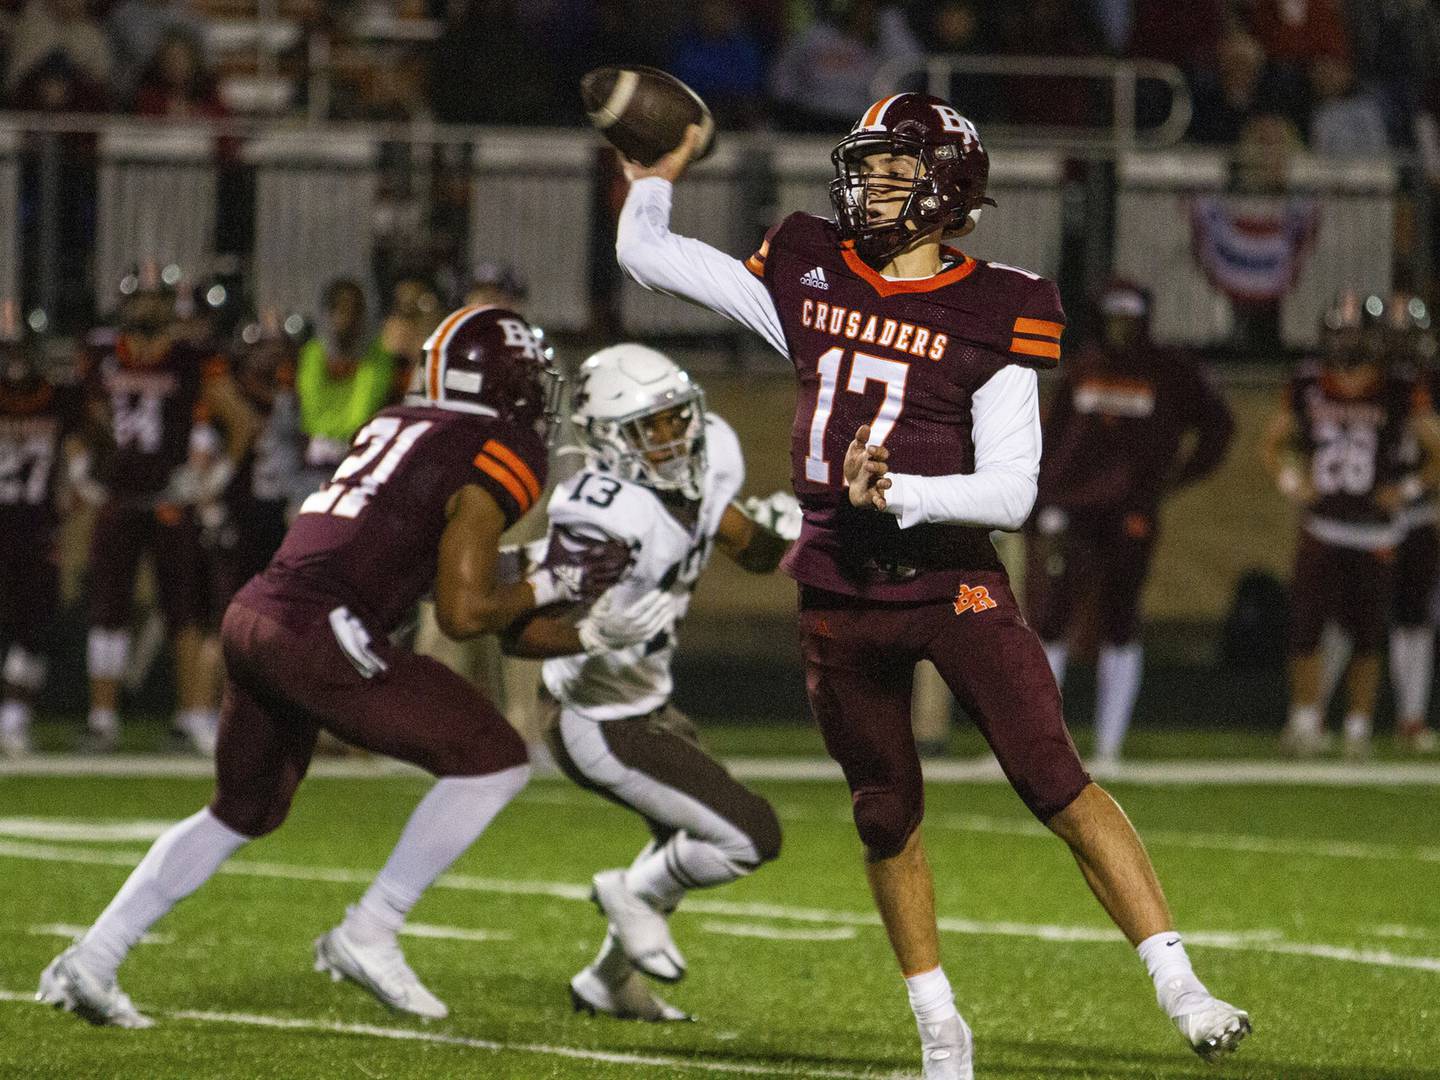 Brother Rice quarterback Ryan Hartz (17) throws a pass against Mount Carmel during a CCL/ESCC Blue game in Chicago on Friday, Sept. 30, 2022.